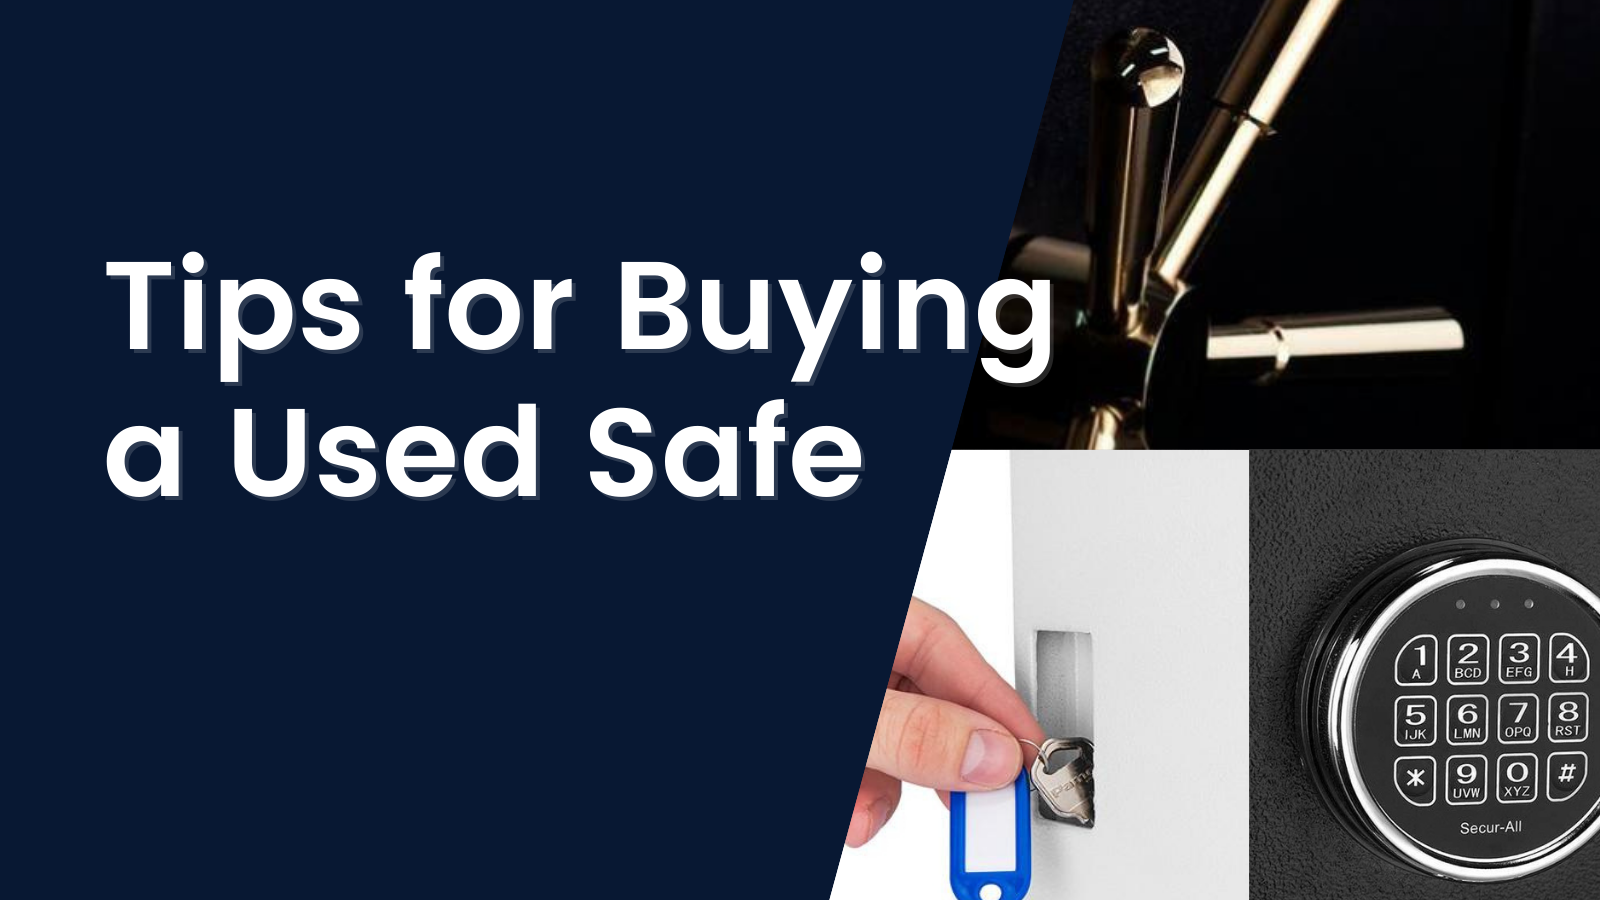 Tips for Buying a Used Safe